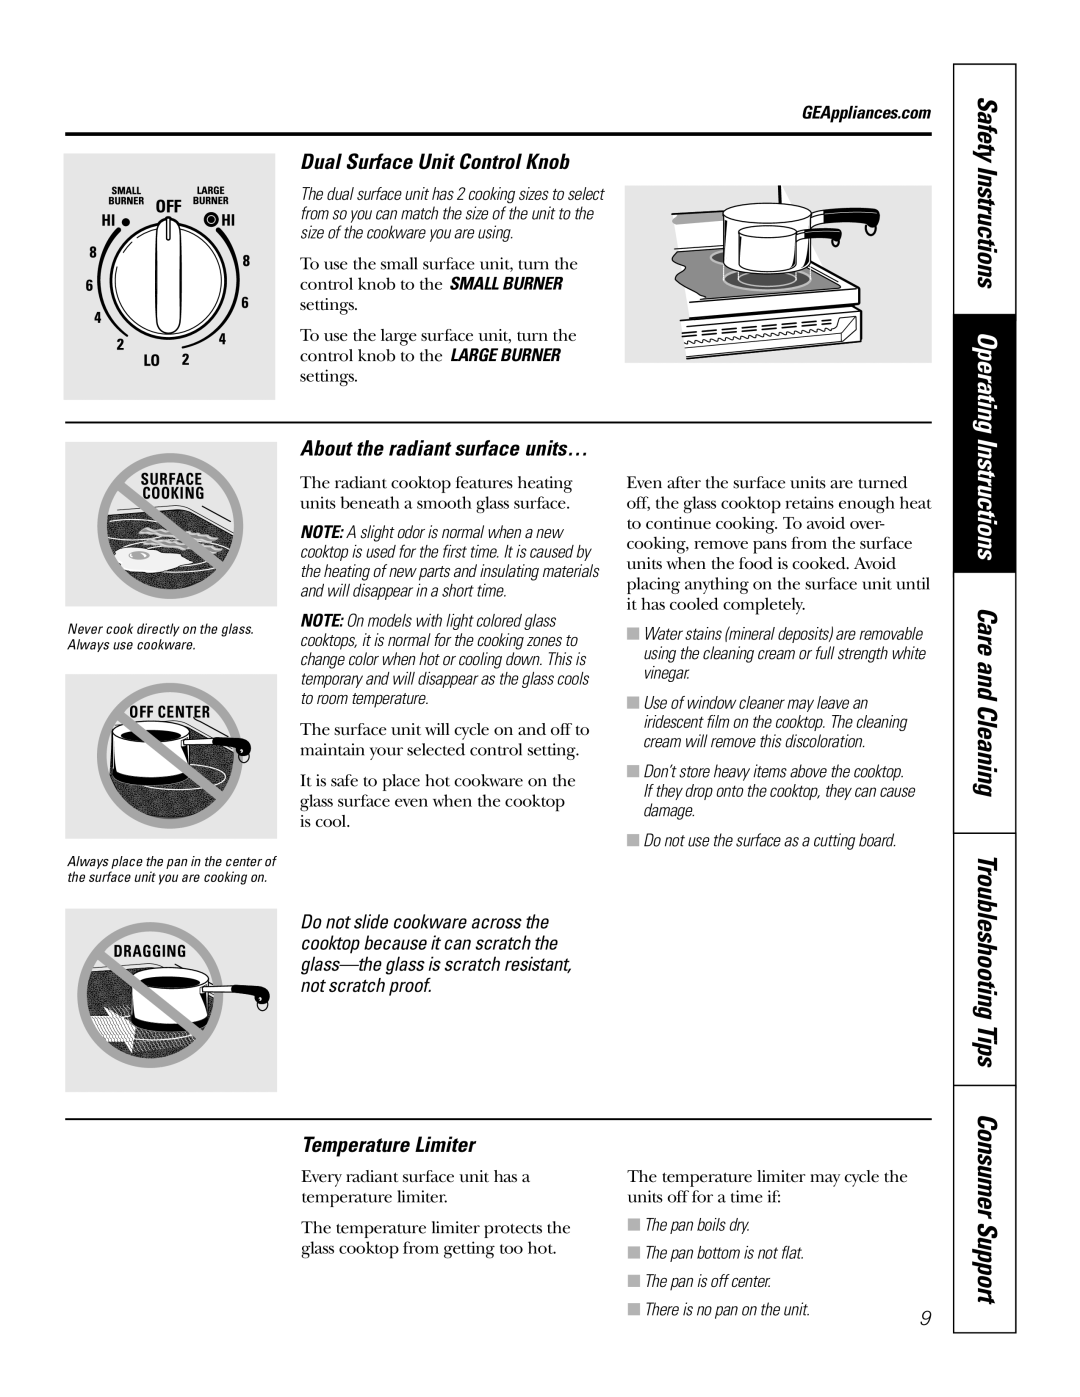 GE JBP84 Safety Instructions Operating, Instructions Care and Cleaning, Troubleshooting Tips, Temperature Limiter 